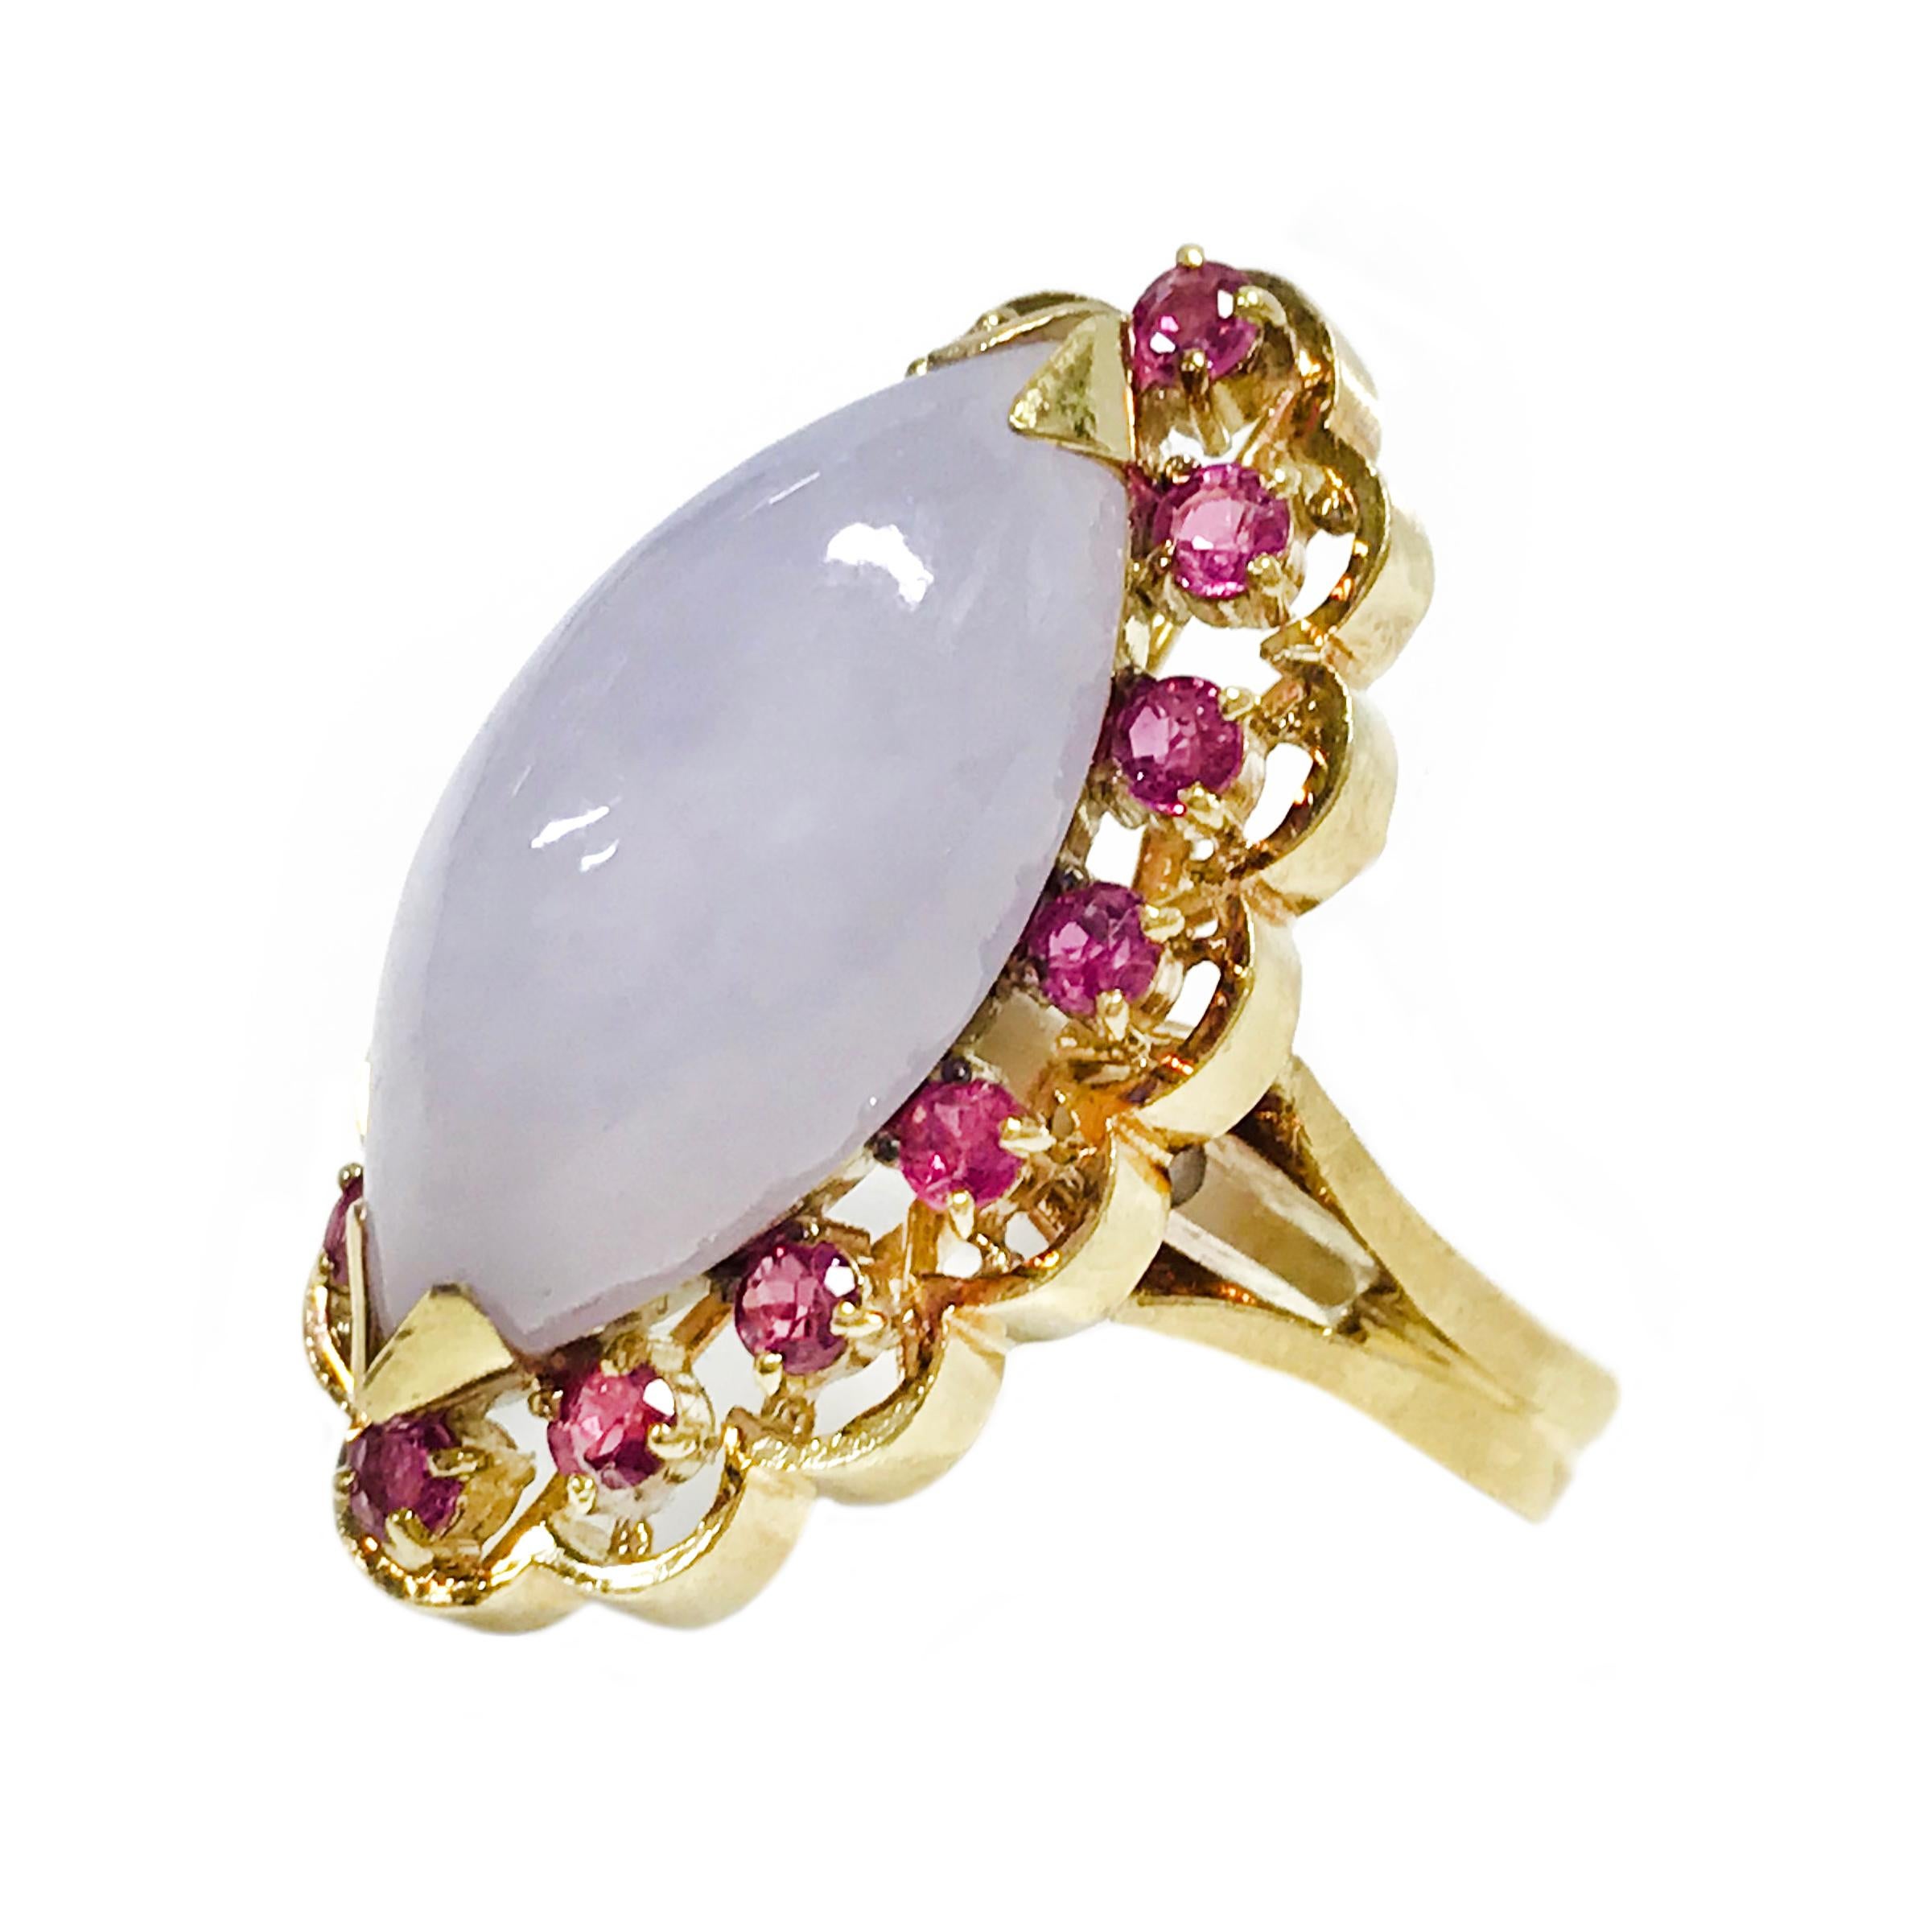 14 Karat Lavender Jade Ruby Navette Cocktail Ring. The ring features a lavender jade marquise cabochon measuring 21.1 x 9.72mm with fourteen round Rubies all prong-set measuring 2.35mm each. The ring size is 7 3/4. The total gold weight is 11.55